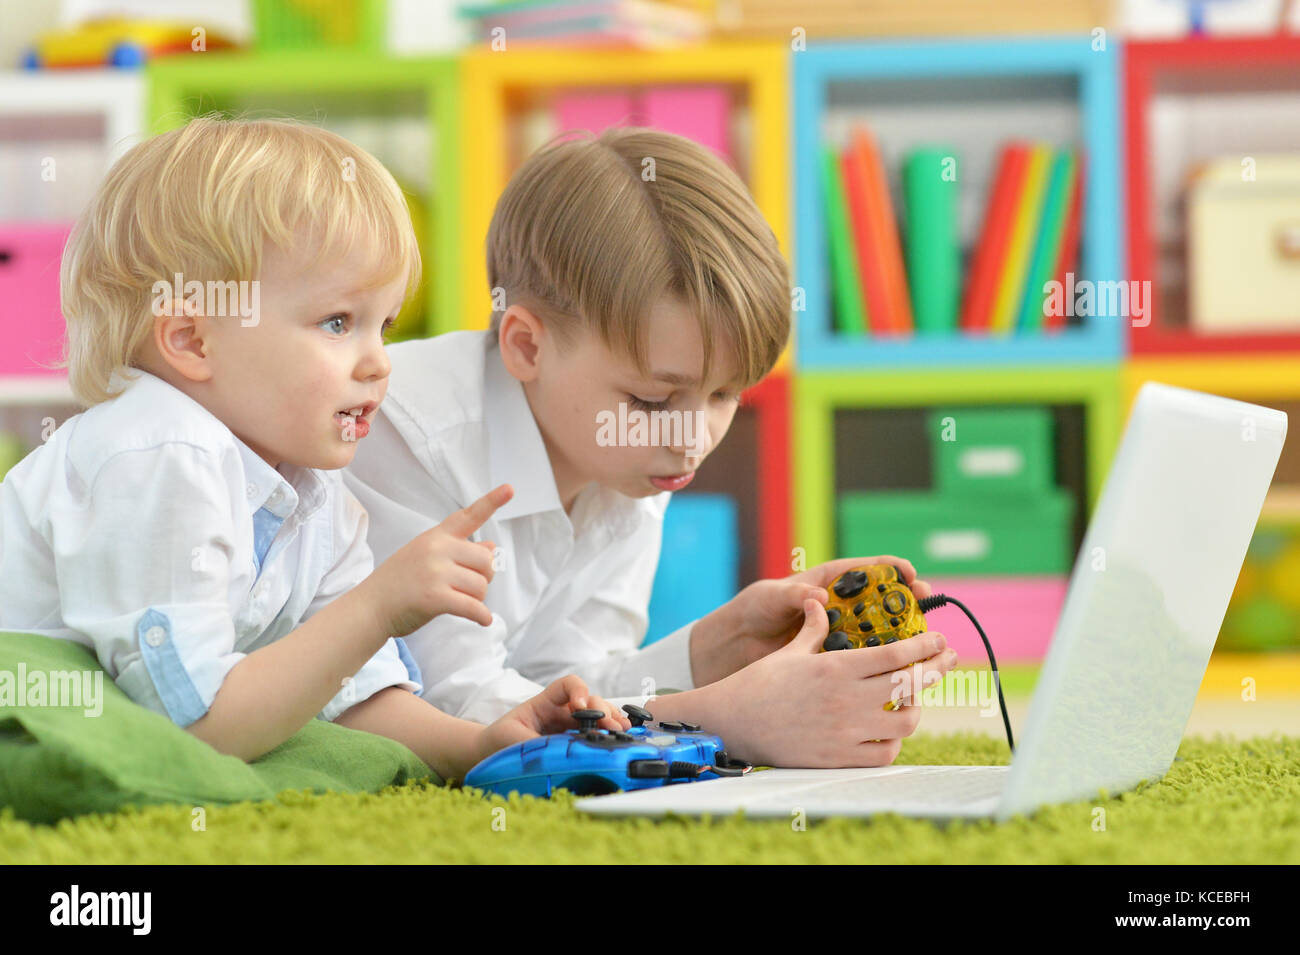 boys playing computer games Stock Photo